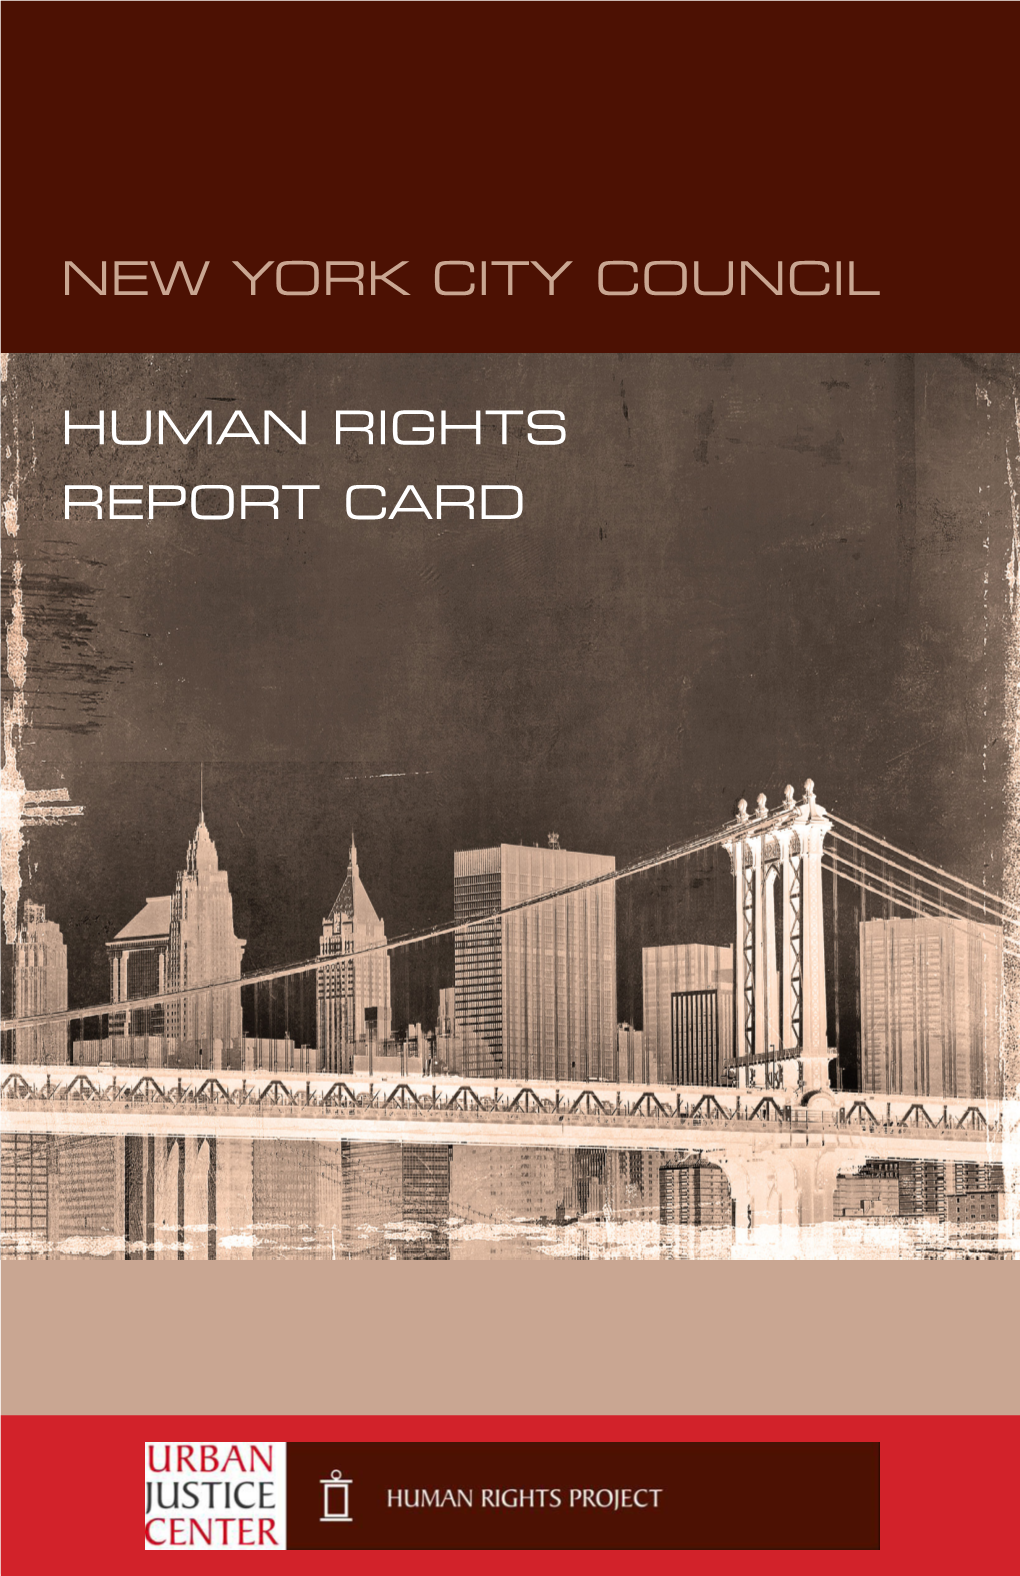 New York City Council Human Rights Report Card